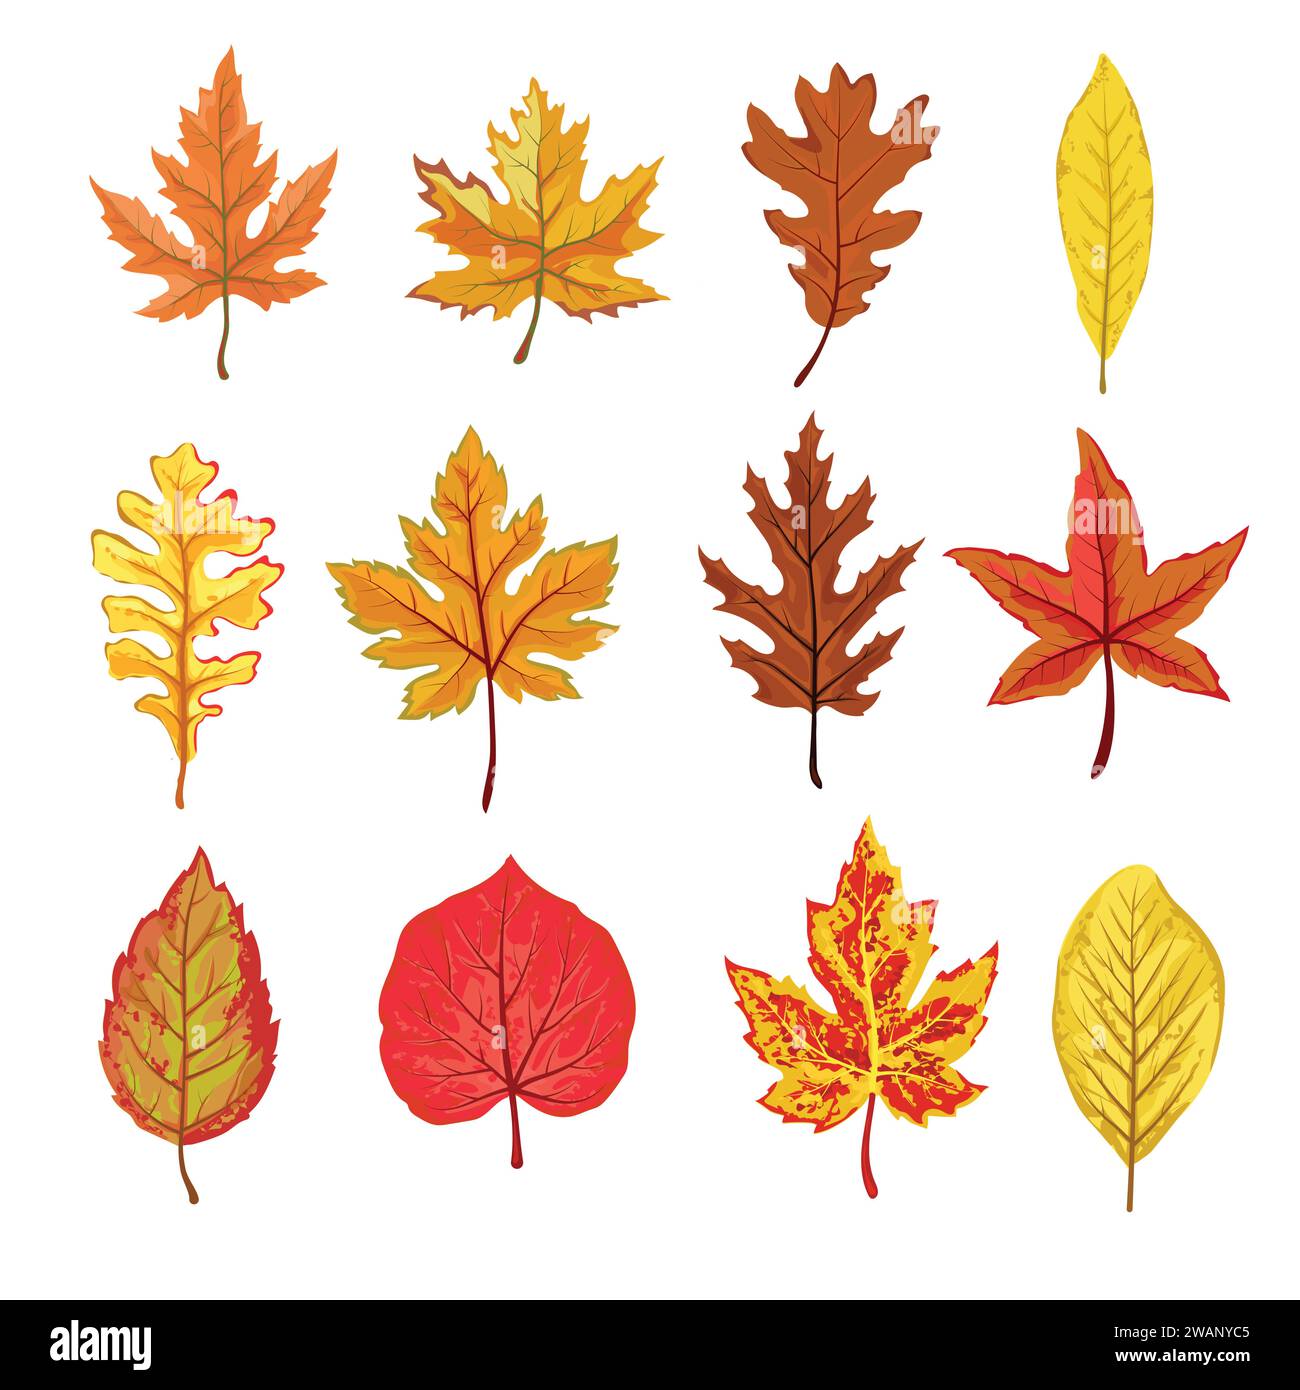 A collection of fallen autumn leaves of different shapes and colors. Autumn background, a poster with colorful leaves. Seasonal autumn elements for cr Stock Vector